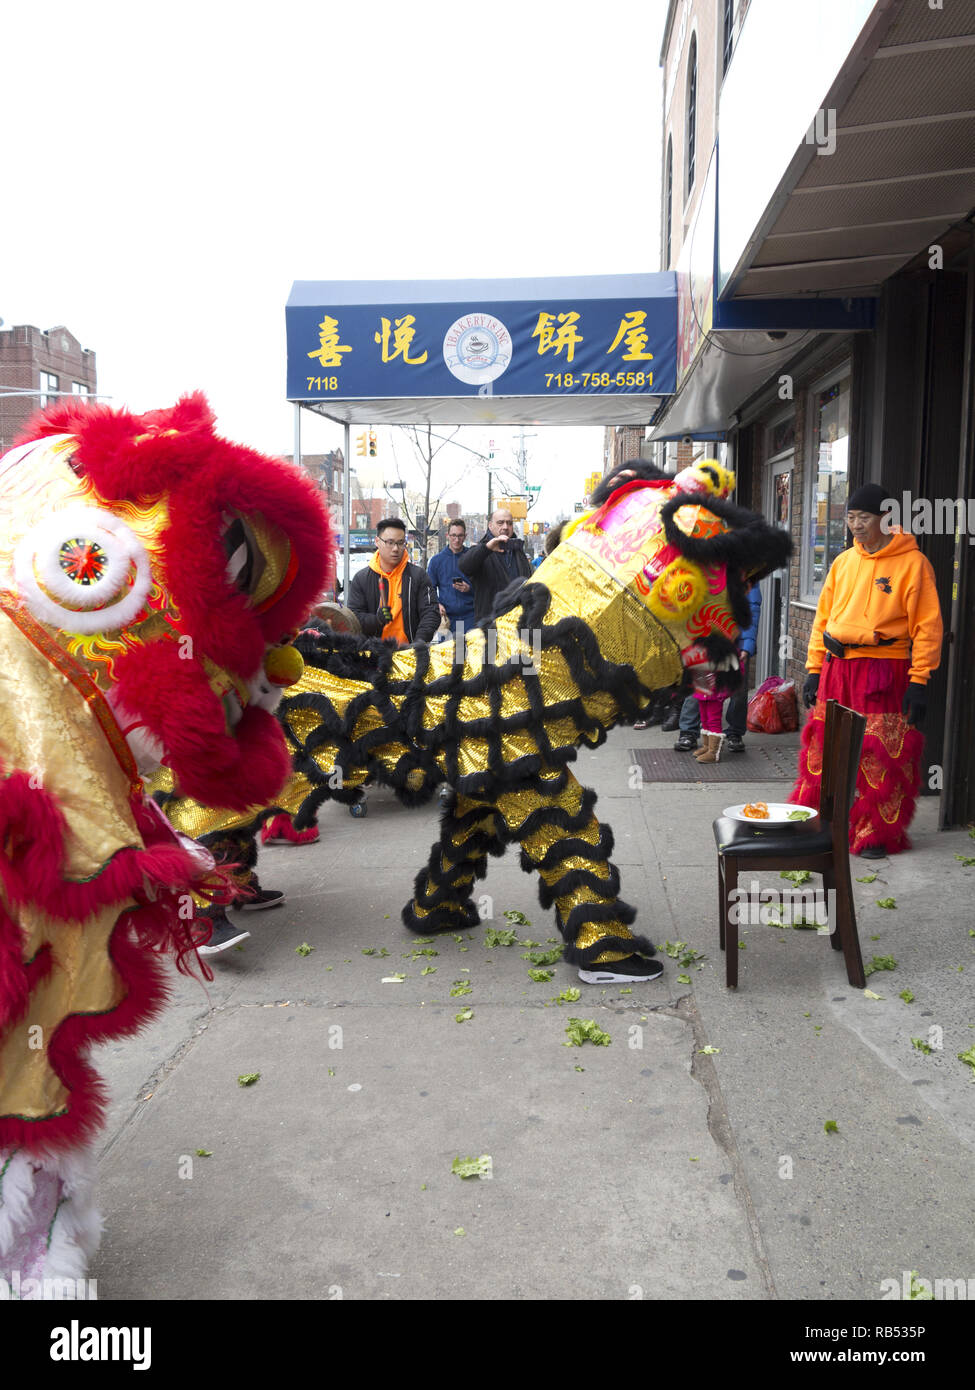 Climax of Lion Dance festival. Lion 'eats' food, vegetables, and spits them out, bringing good luck to shop owners on Chinese New Year in NYC, 2017. Stock Photo